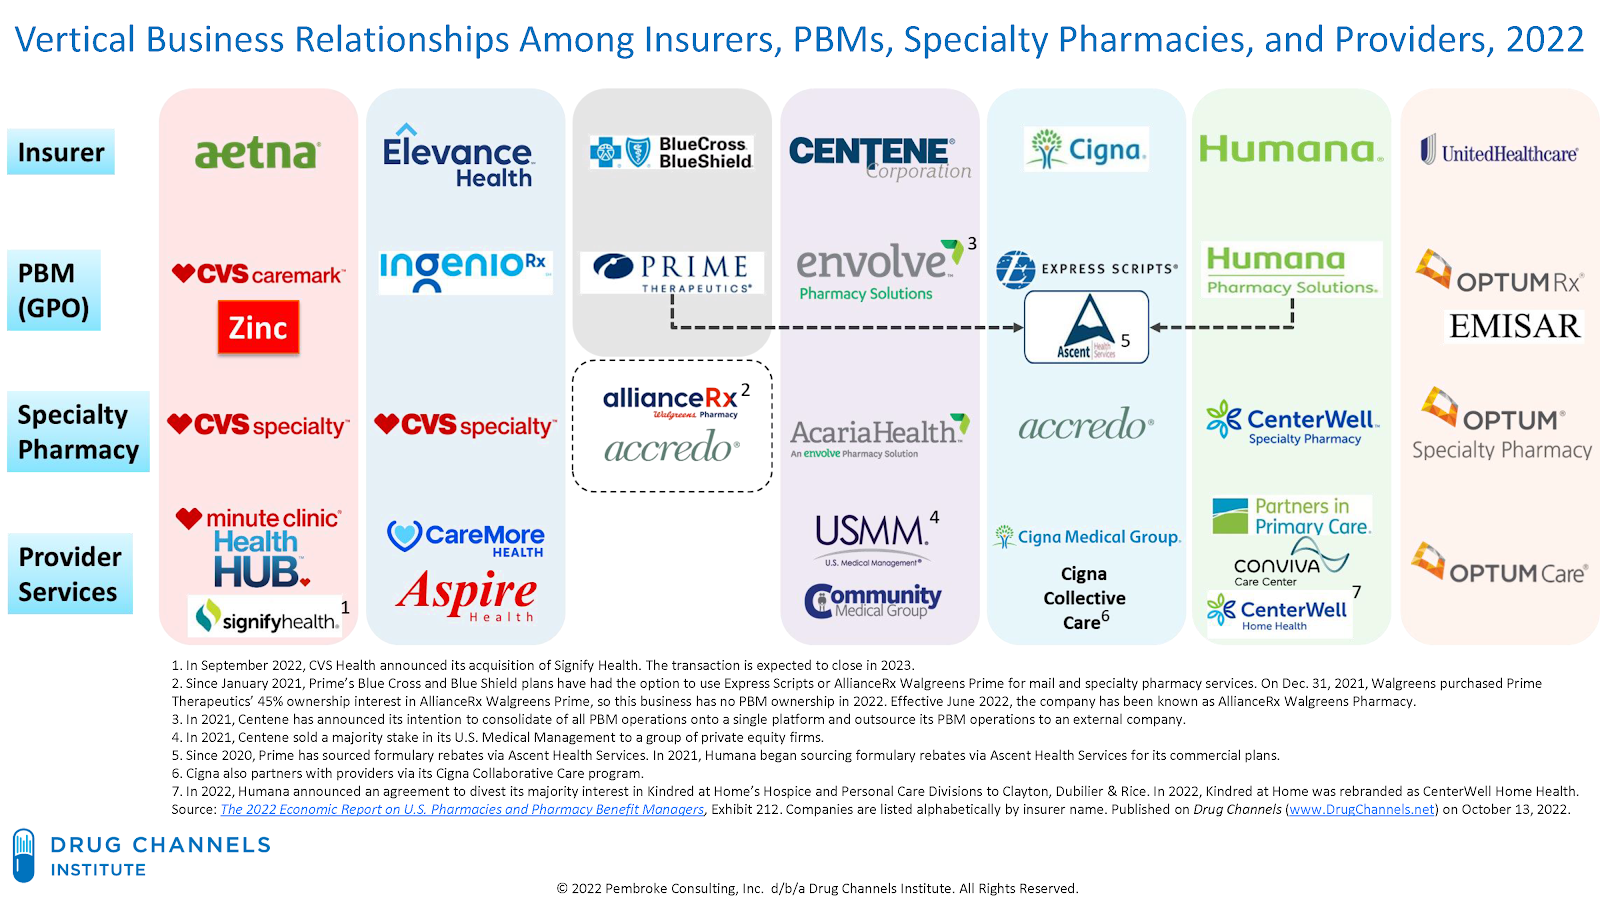 Drug Channels Mapping the Vertical Integration of Insurers, PBMs